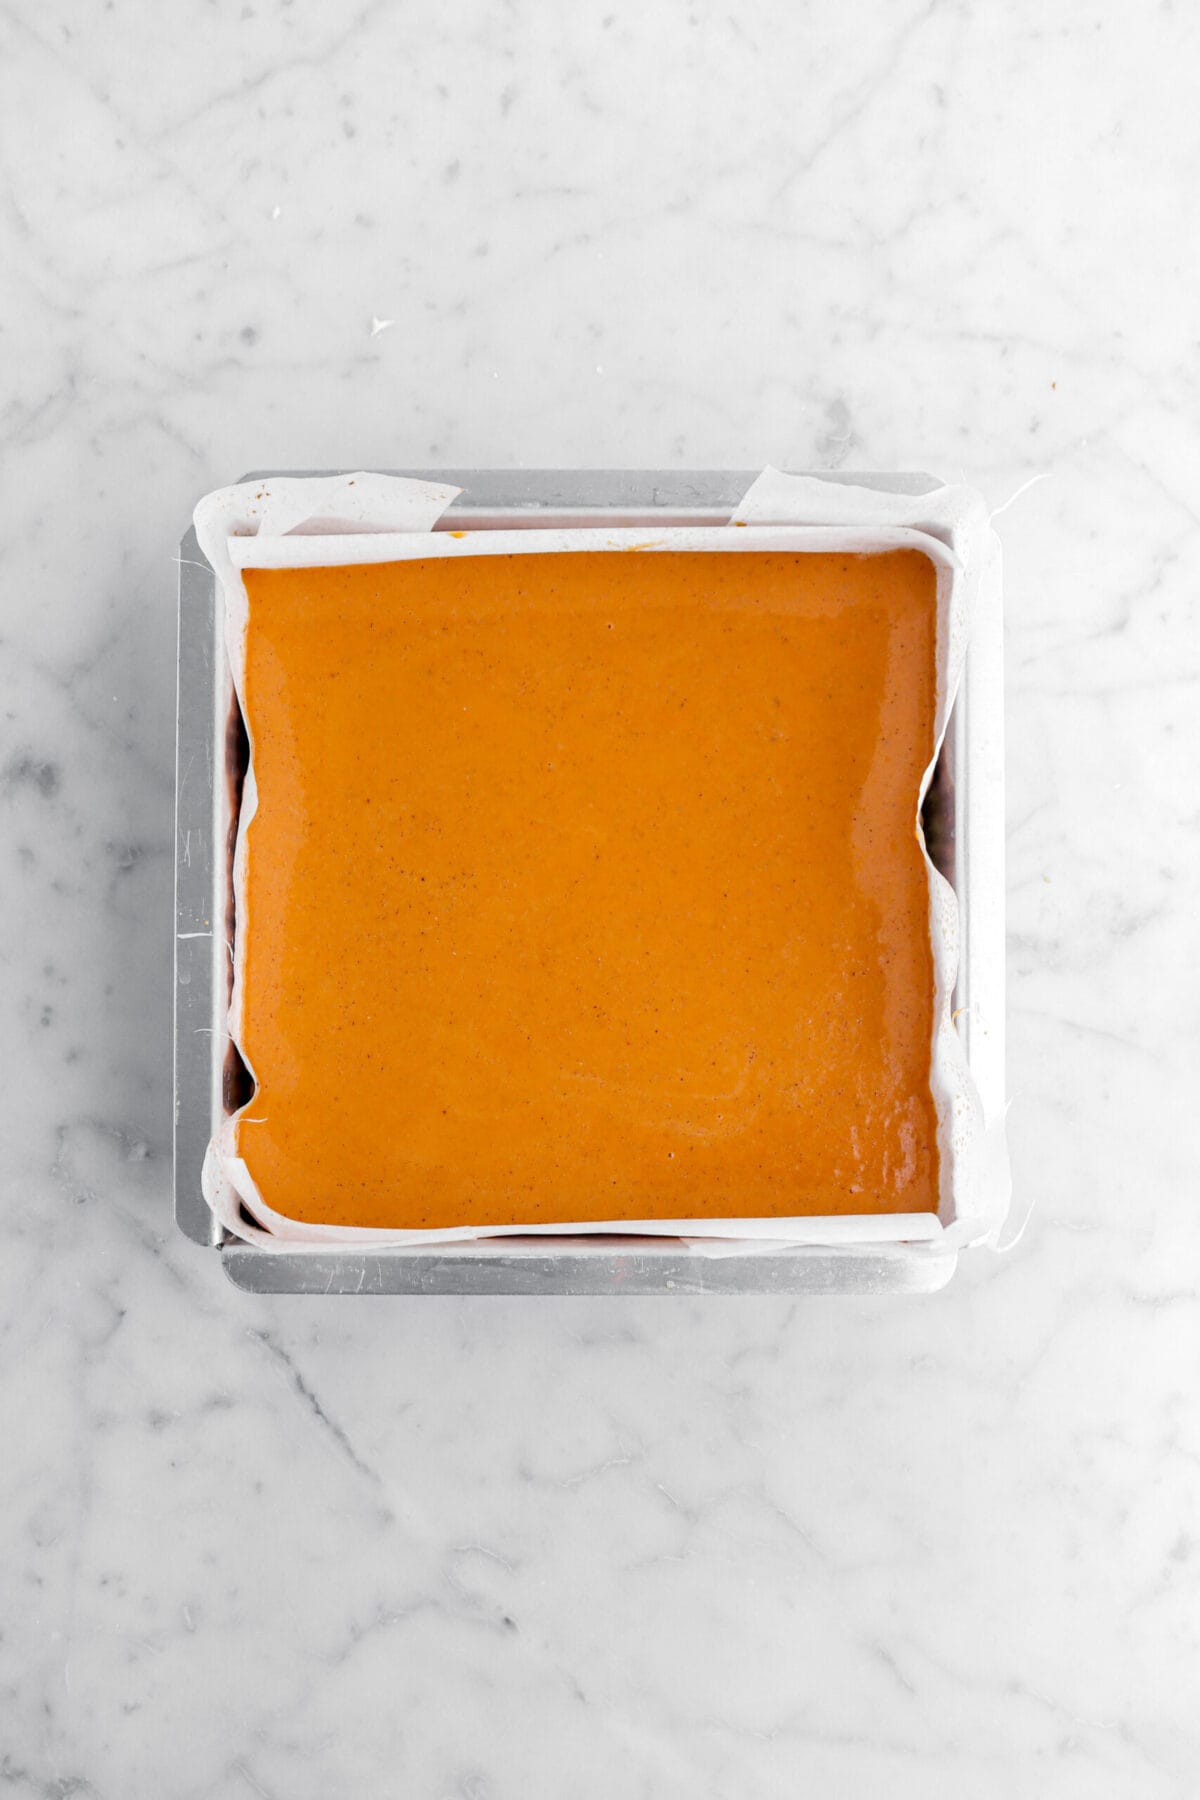 pumpkin pie in square lined cake pan.